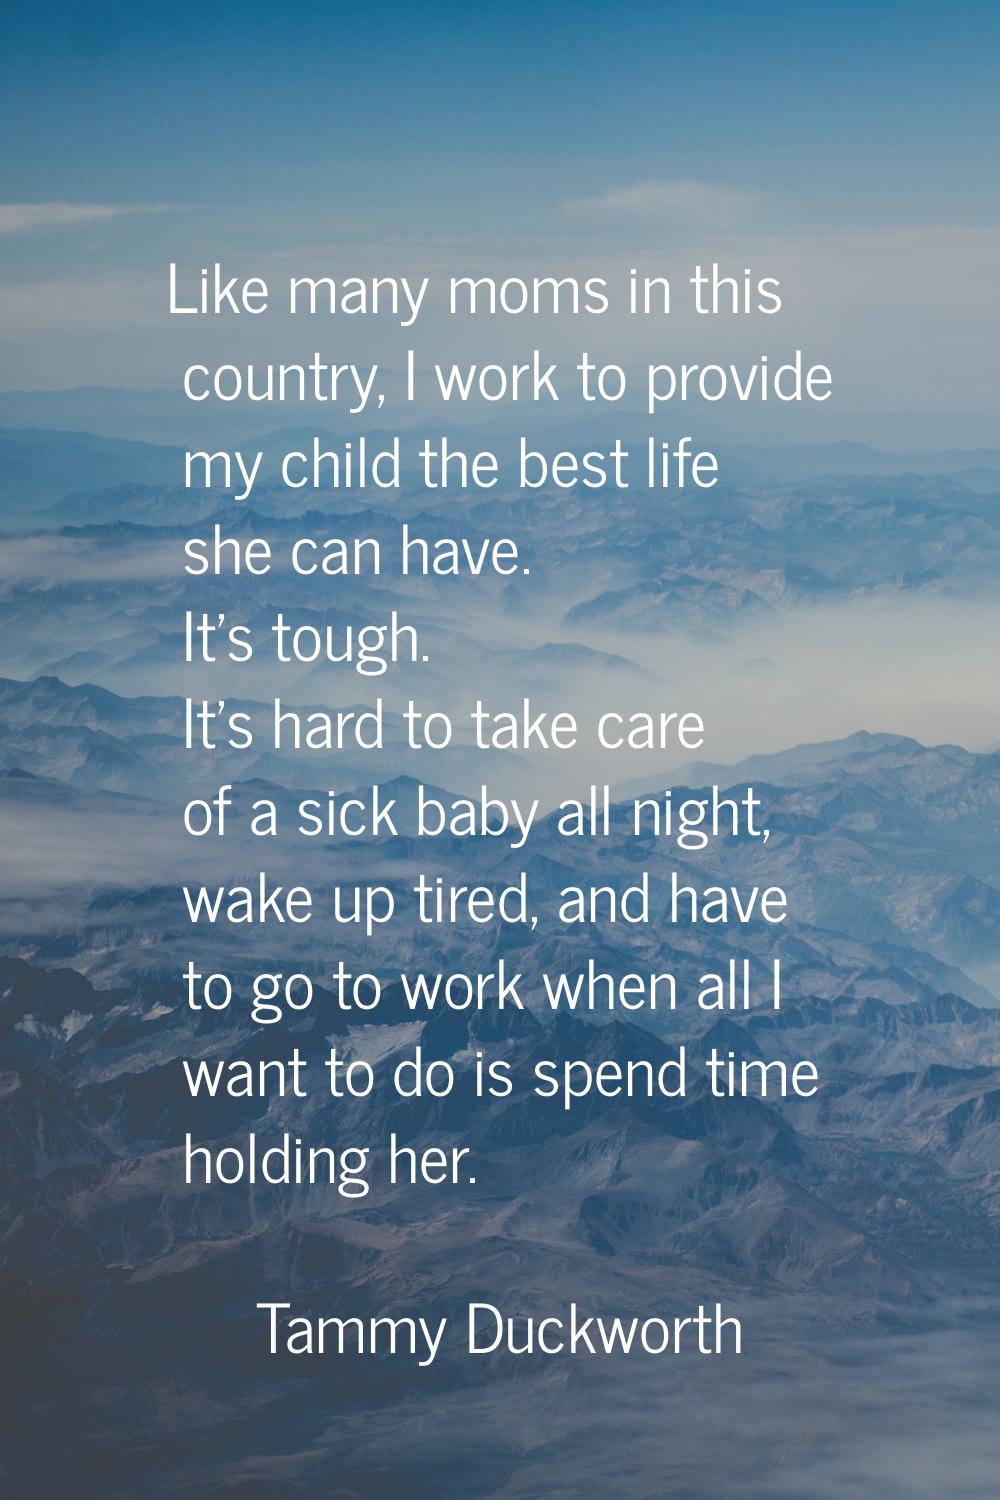 Like many moms in this country, I work to provide my child the best life she can have. It's tough. 